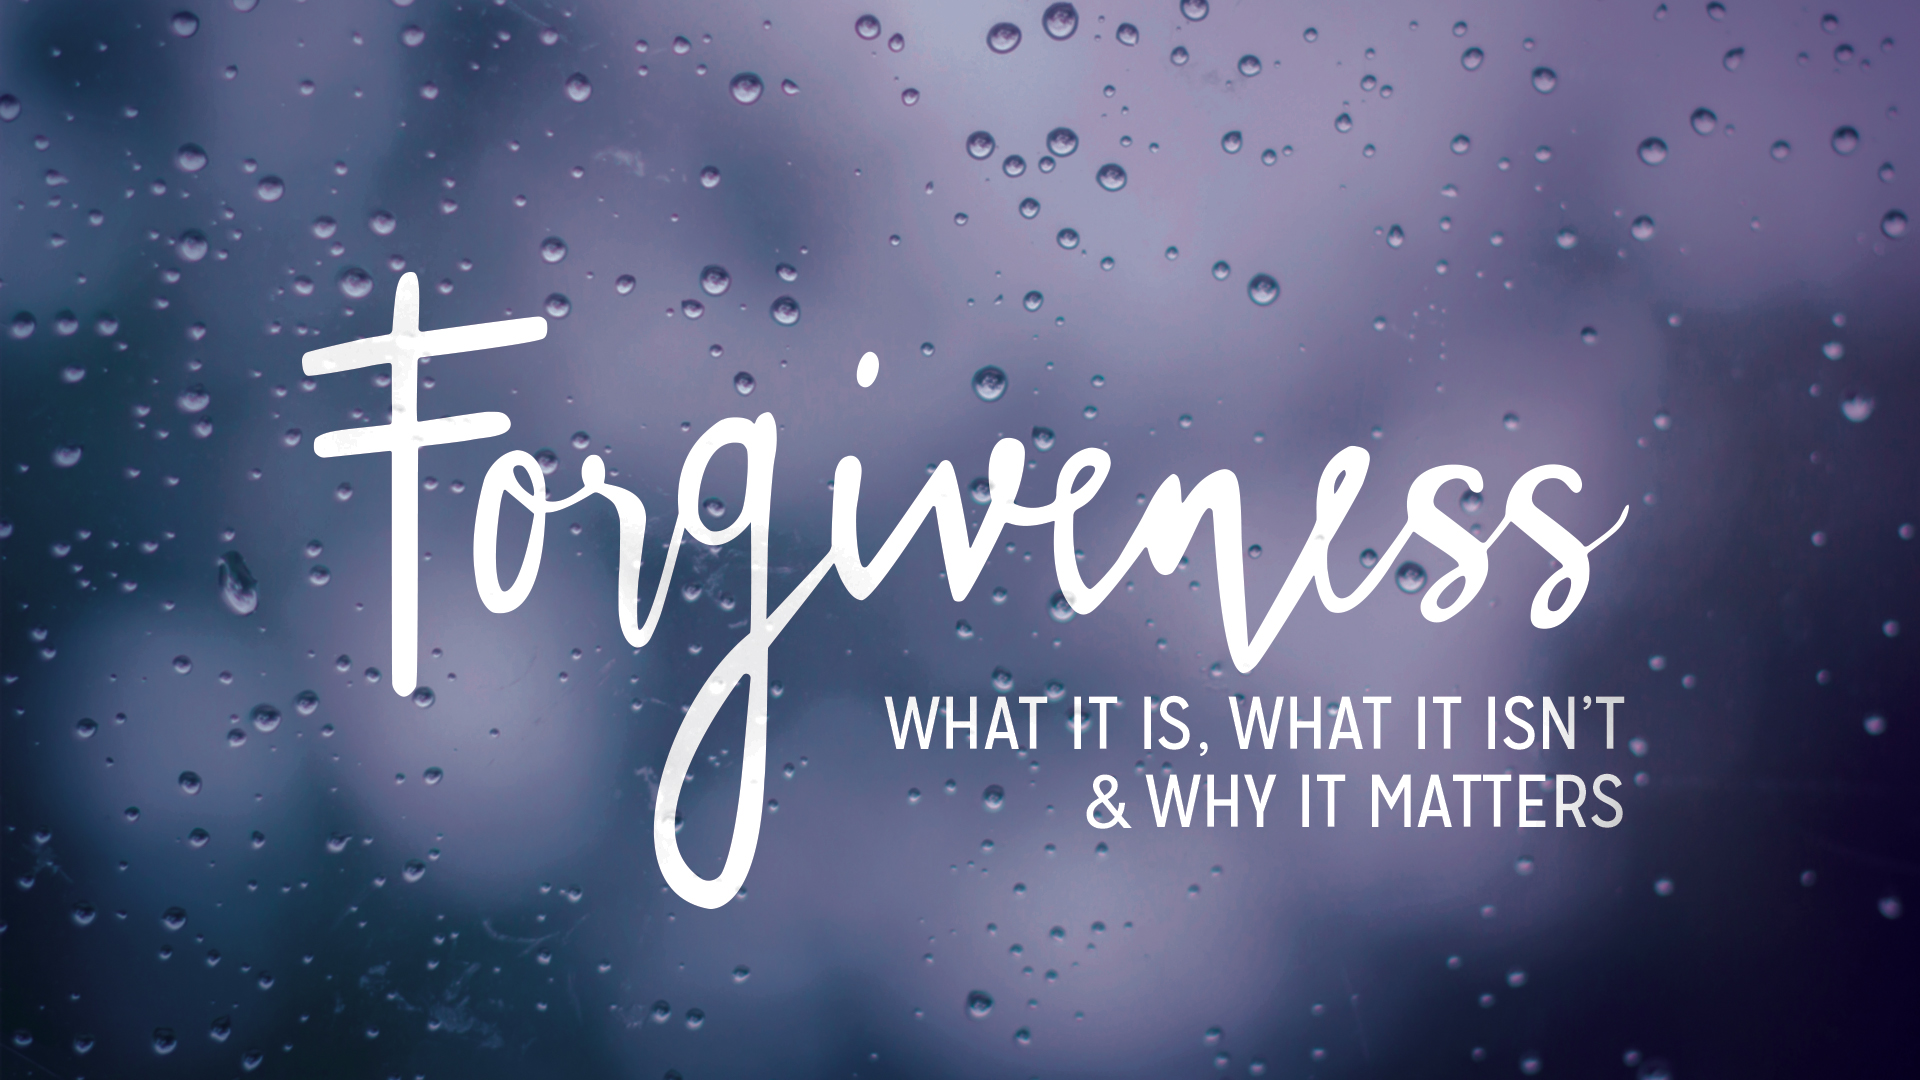 Forgiveness Page - Calligraphy , HD Wallpaper & Backgrounds